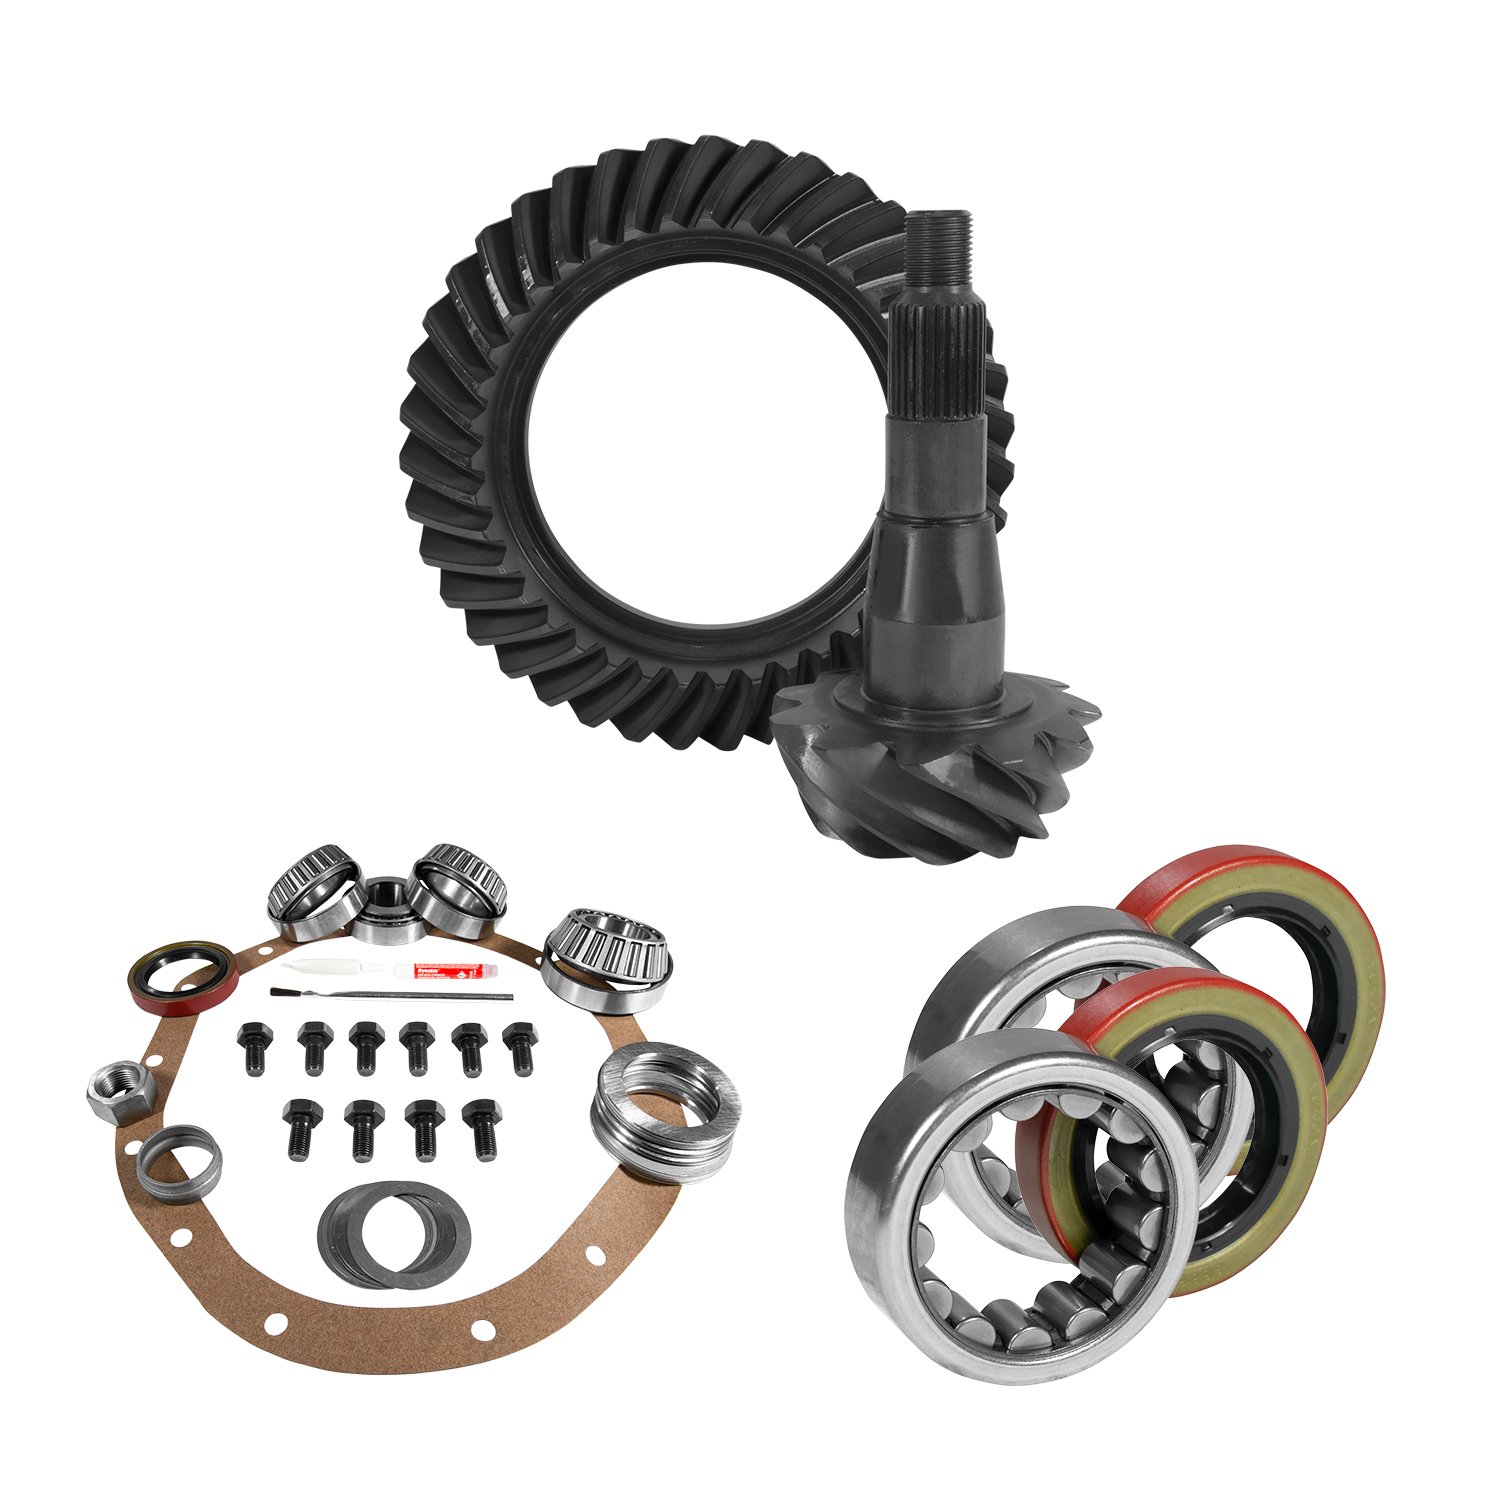 USA Standard 10782 9.25 in. Chy 3.55 Rear Ring & Pinion Install Kit, 1.62 in. Id Axle Bearings & Seal